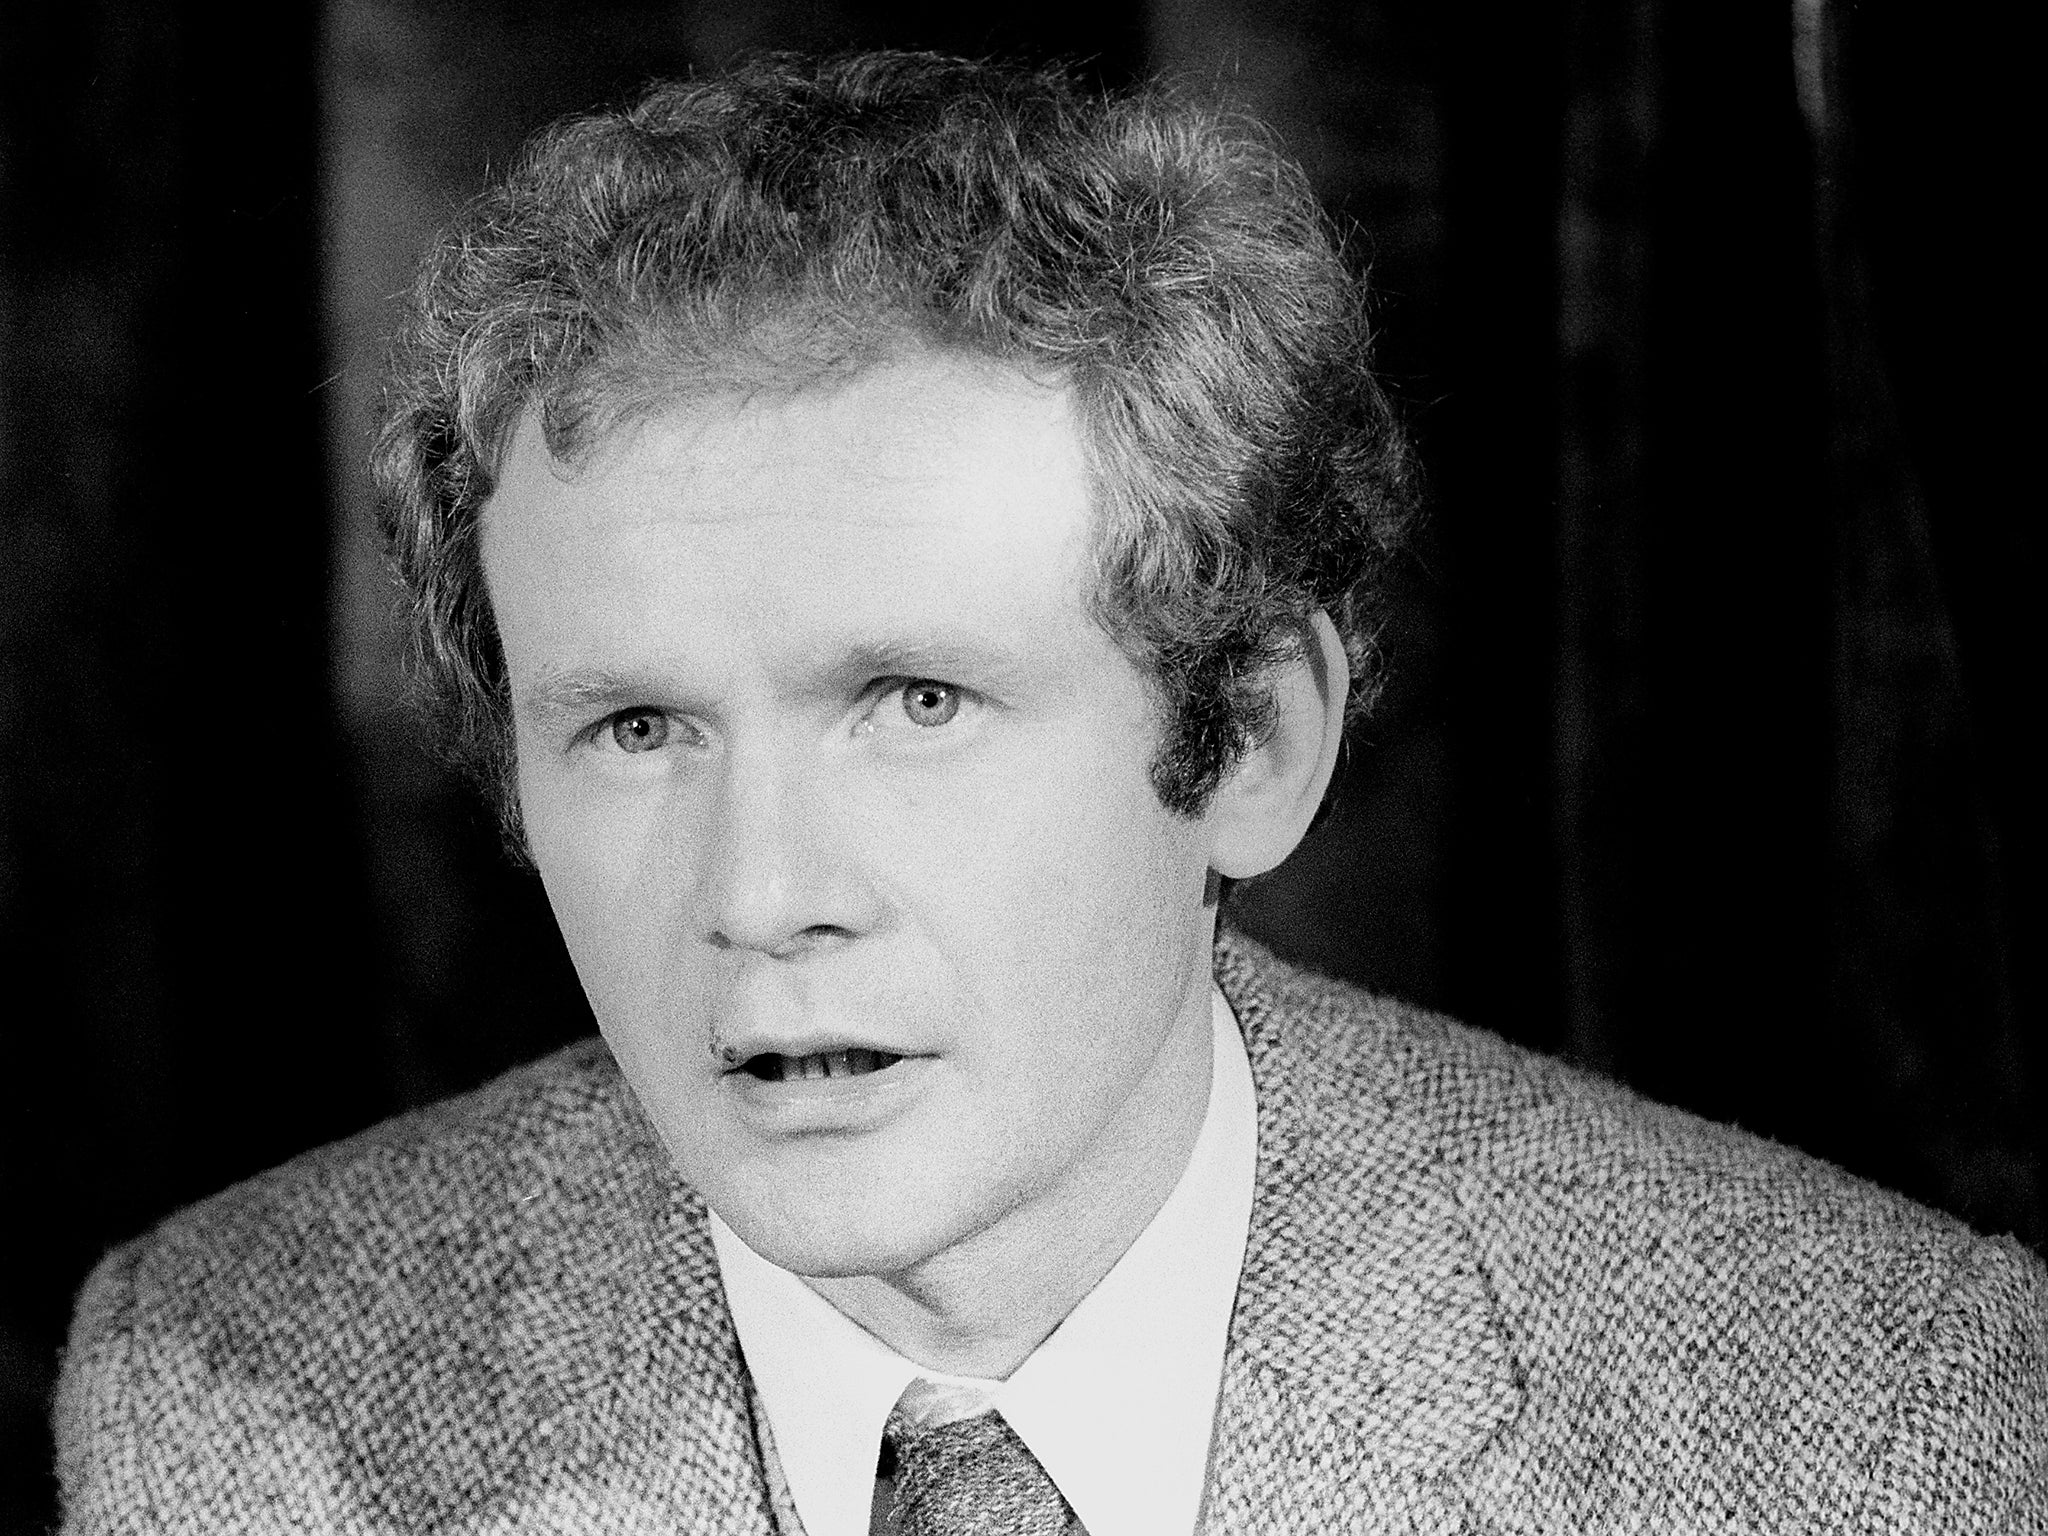 All of us were very young,’ said McGuinness, ‘we were not like a conventional army’